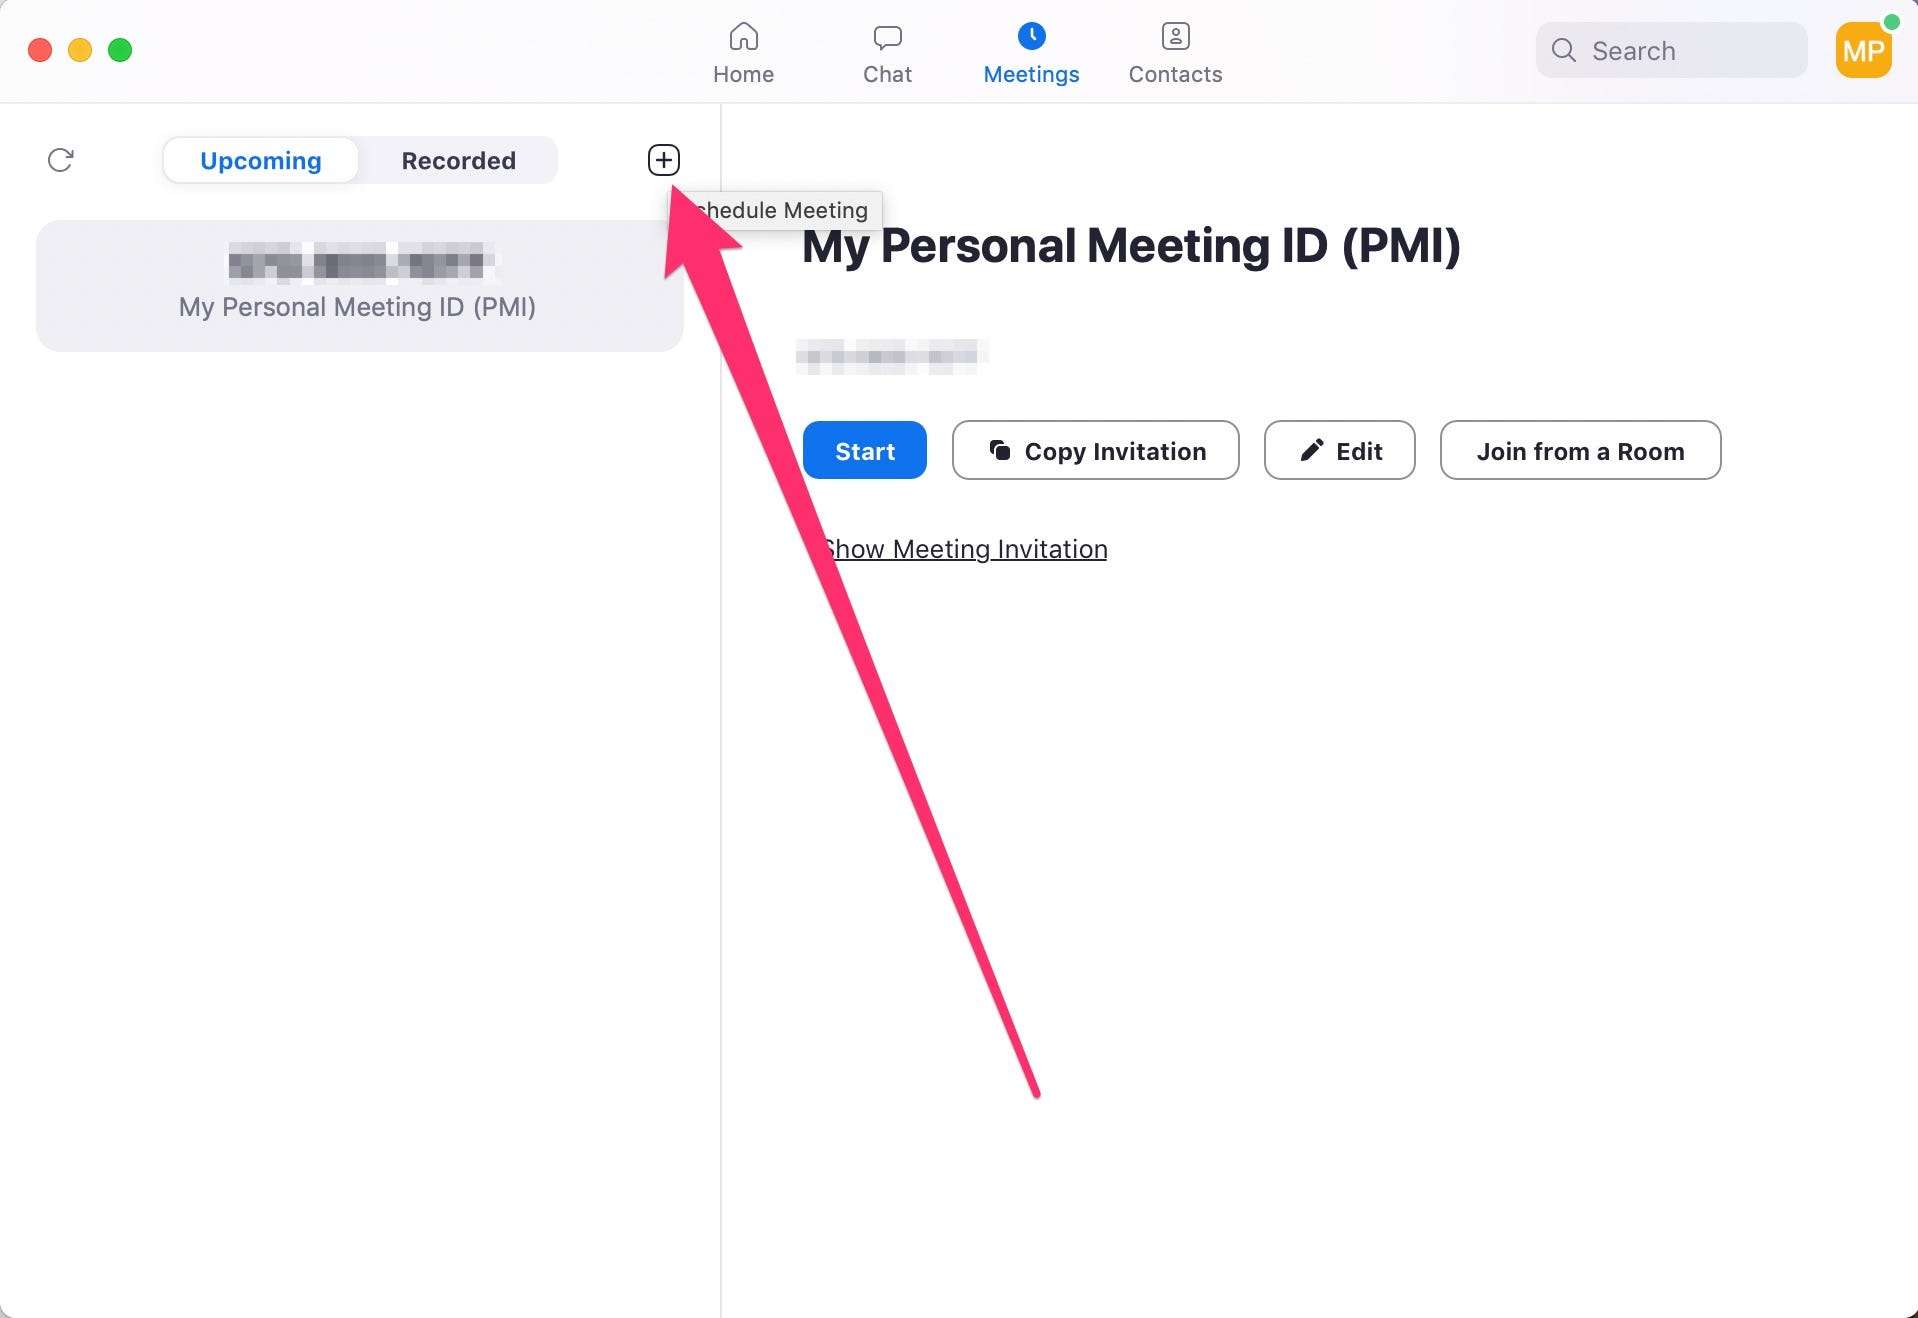 How to send a Zoom invite in 4 different ways to set up group meetings